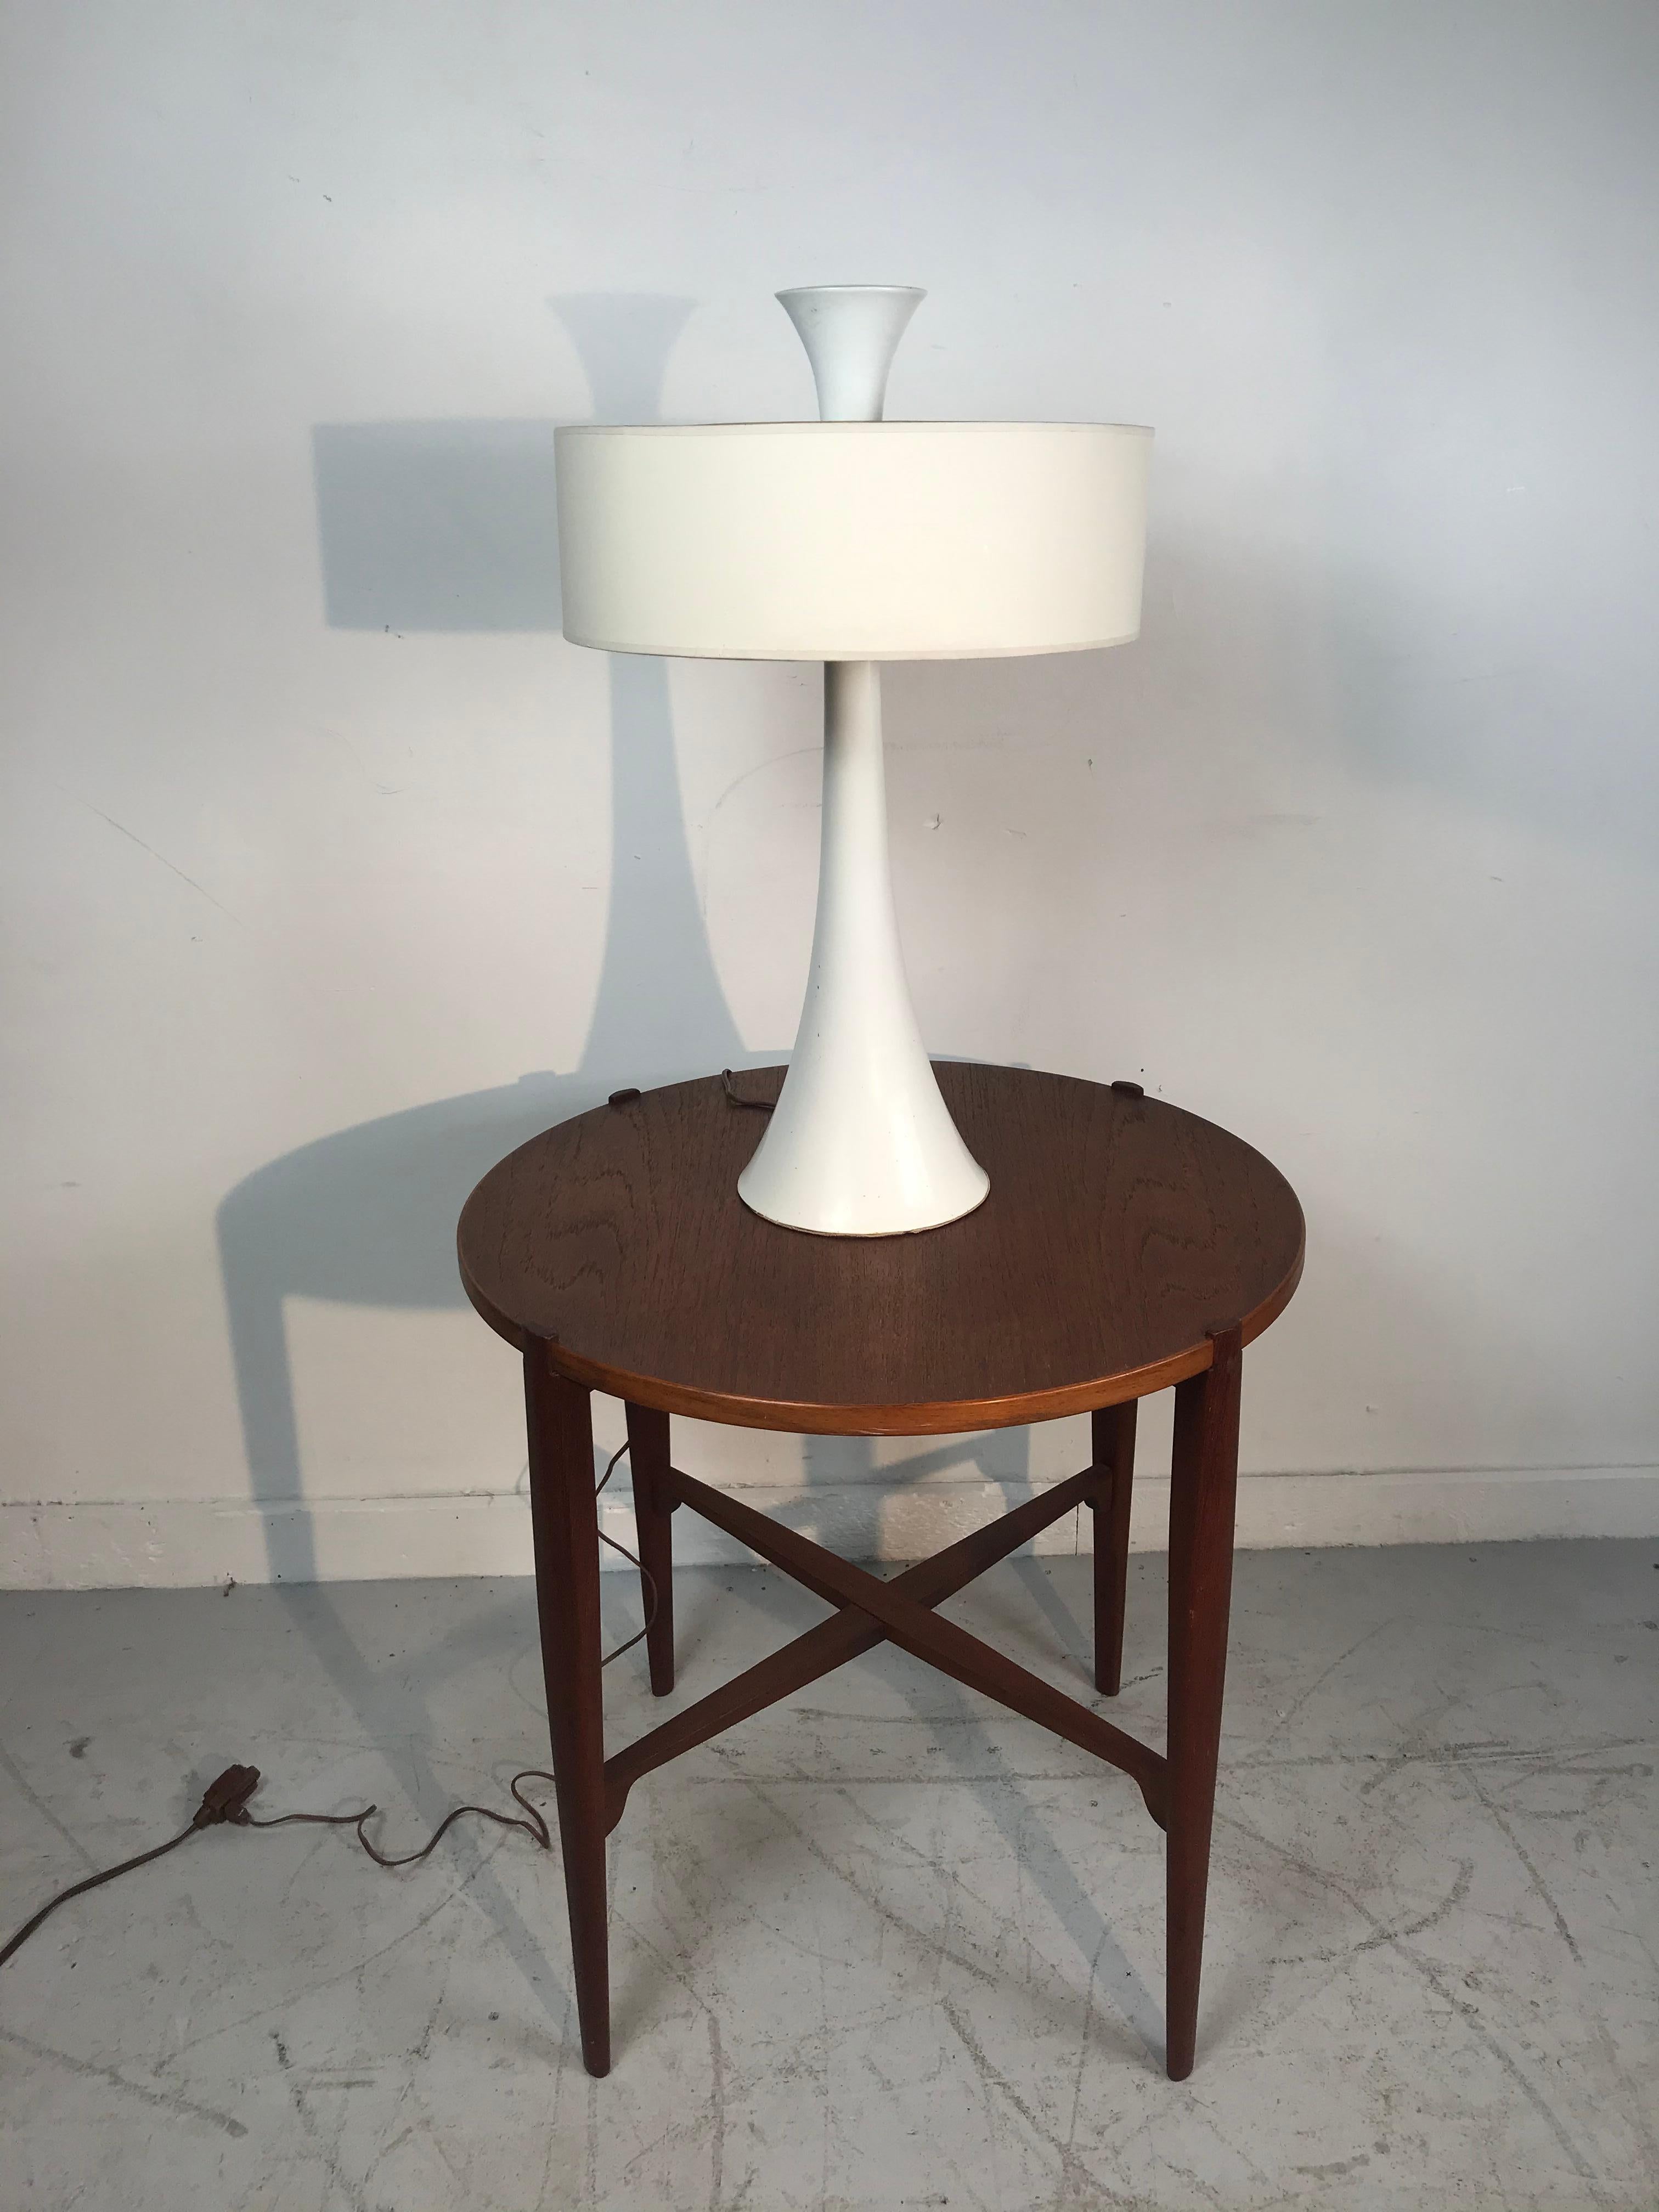 Elegant white modernist trumpet base table lamp attributed to Gerald Thurston for Lightolier. Lacquered metal trumpet shape base with amazing oversized finial. Retains original white cylinder lamp shade (minor damage) and metal diffuser. Truly a